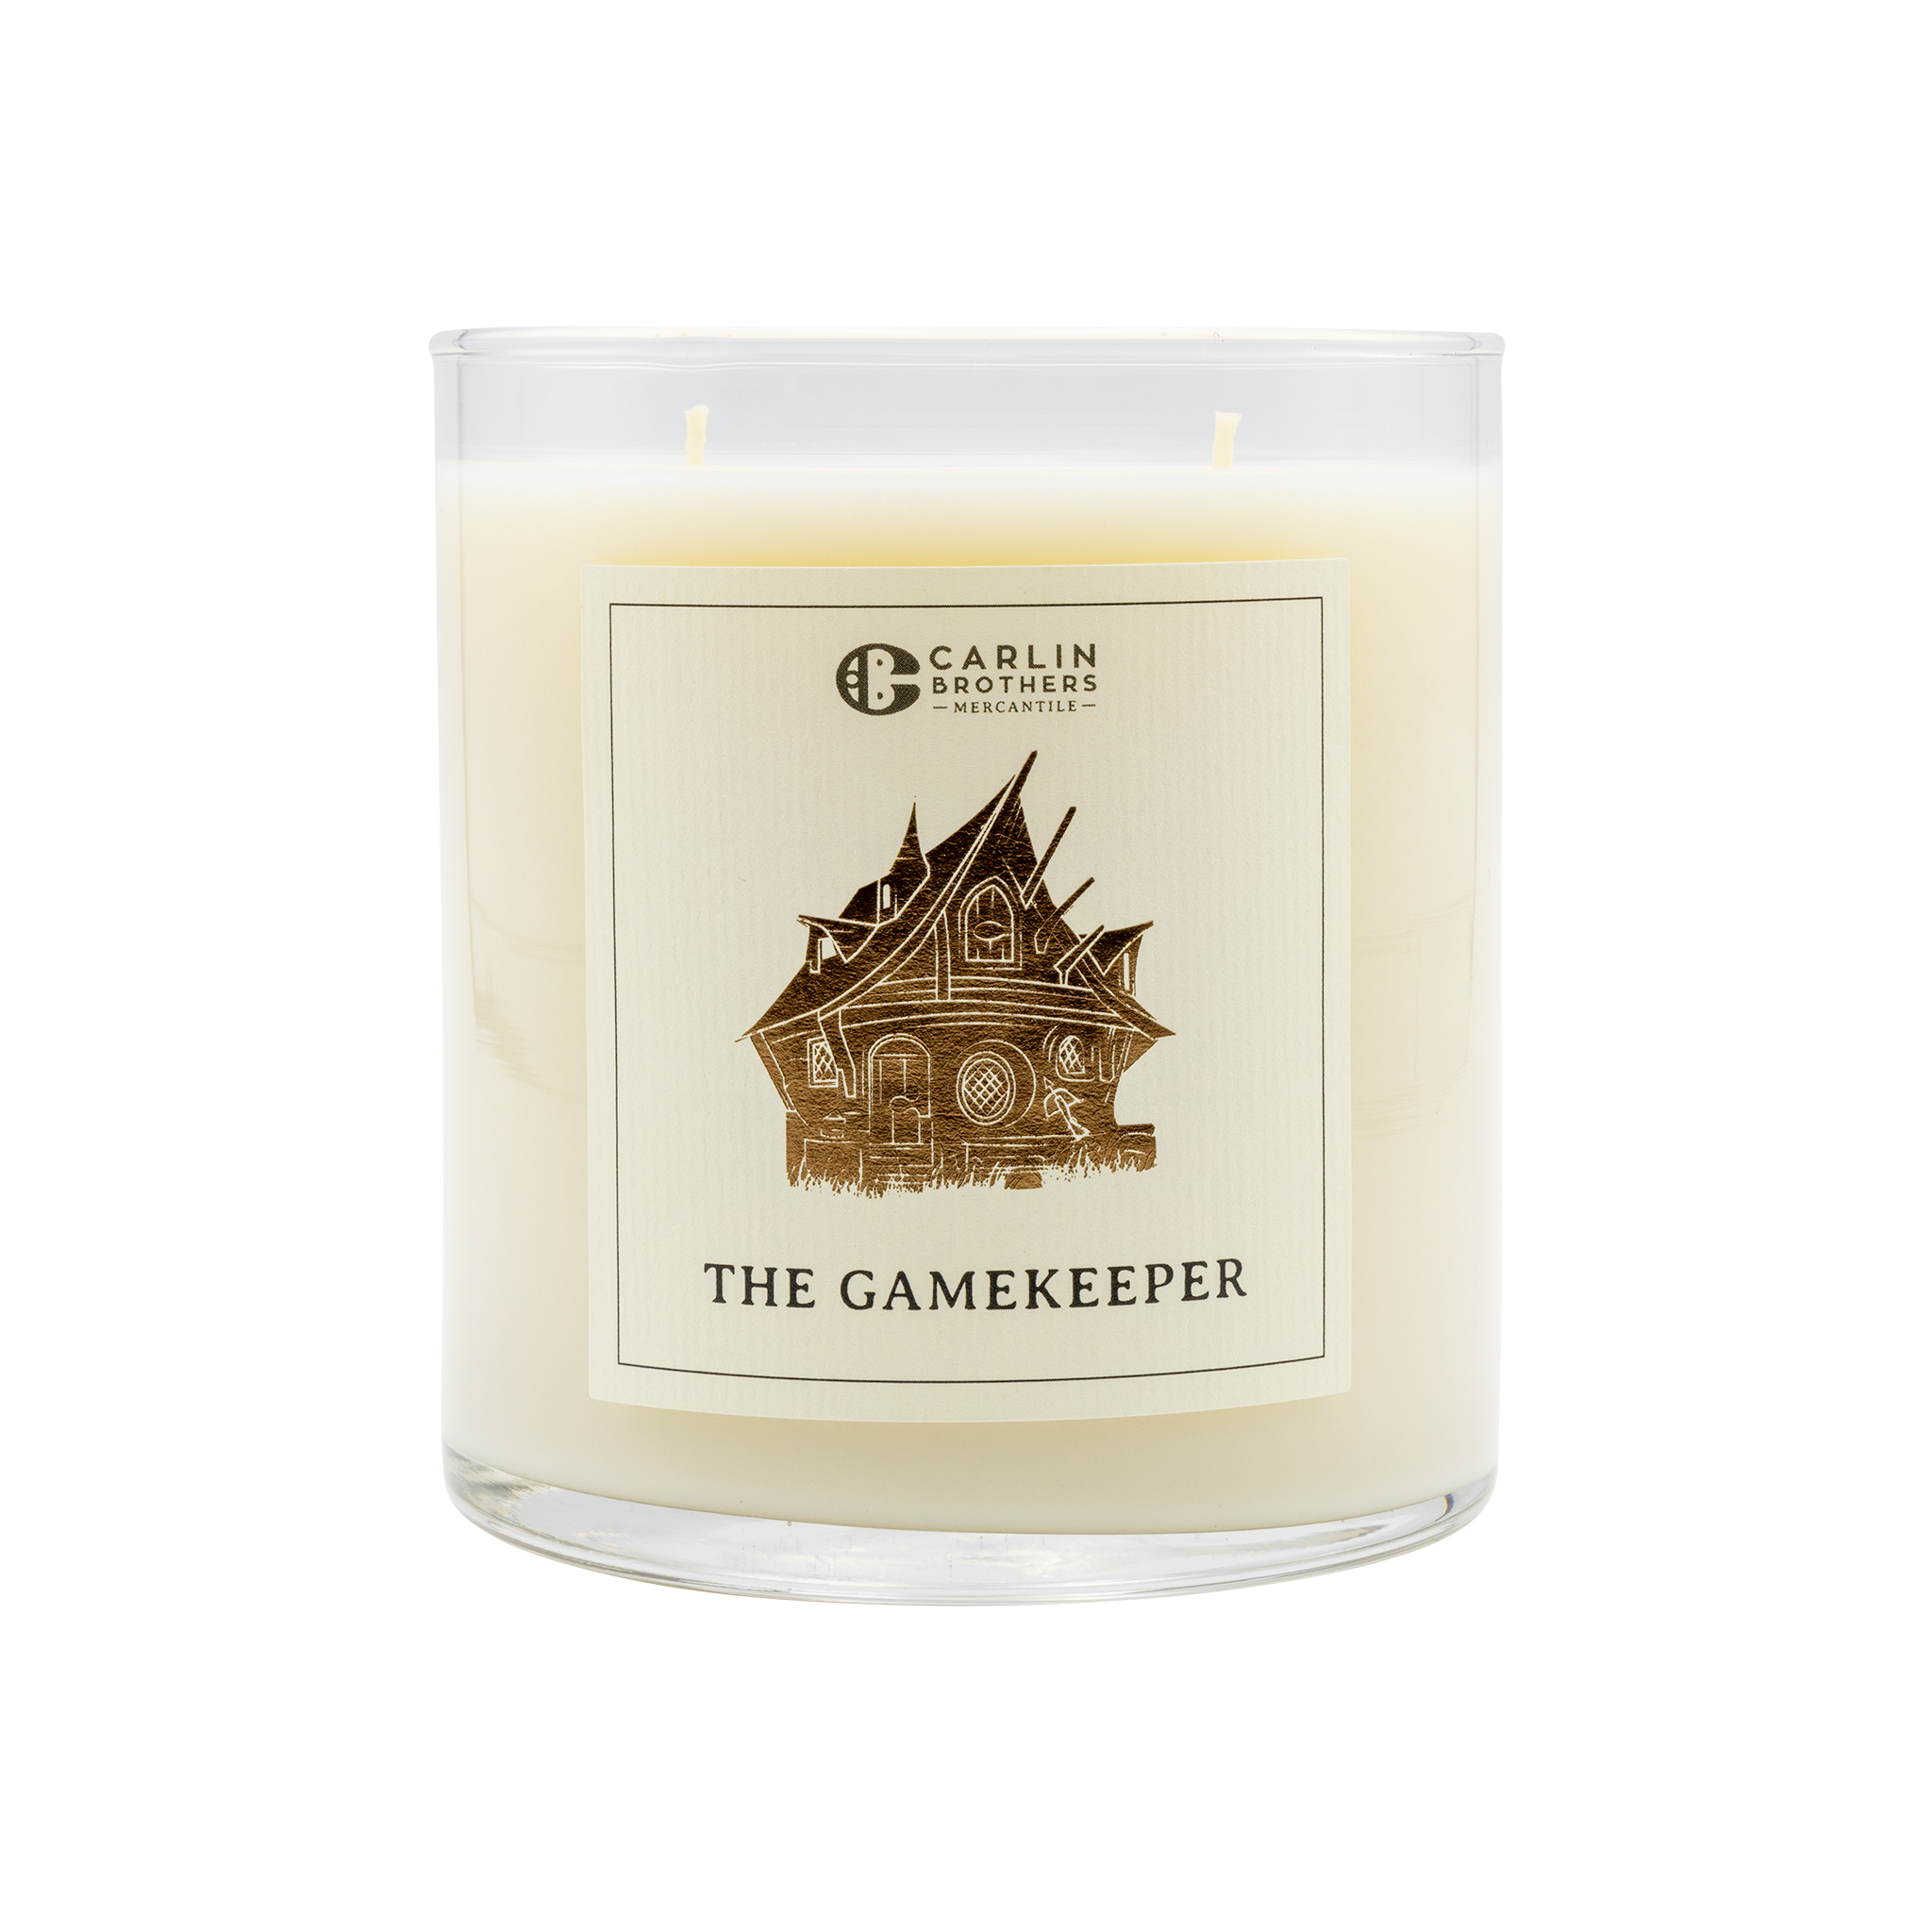 The Gamekeeper Wizarding Candle Super Carlin Brothers Mercantile 